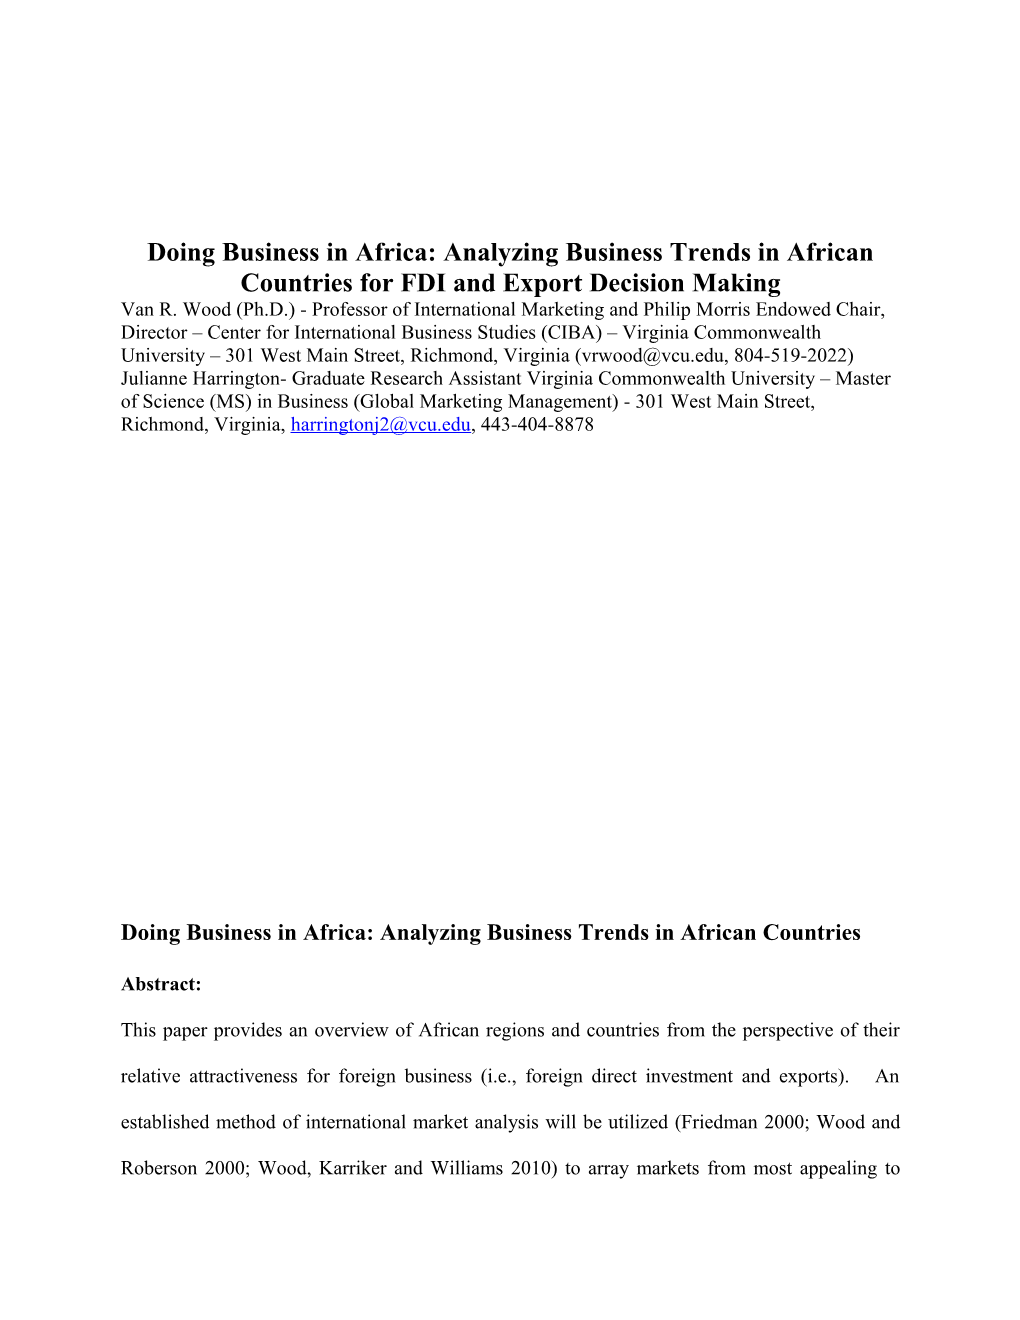 Doing Business in Africa: Analyzing Business Trends in African Countries